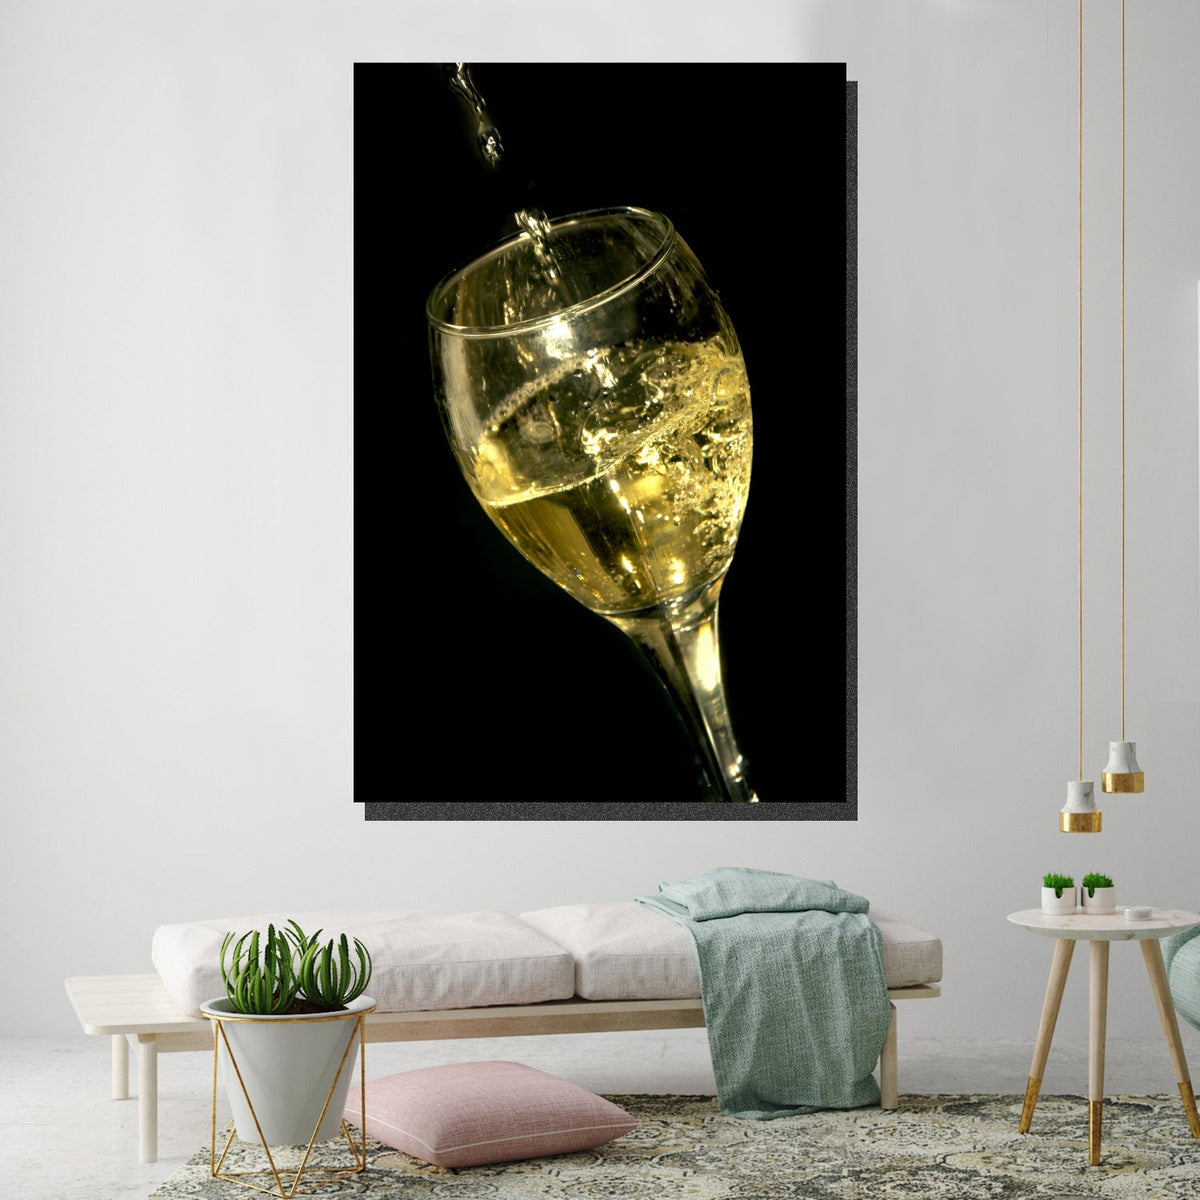 https://cdn.shopify.com/s/files/1/0387/9986/8044/products/GlassofChampagneCanvasArtprintStretched-1.jpg